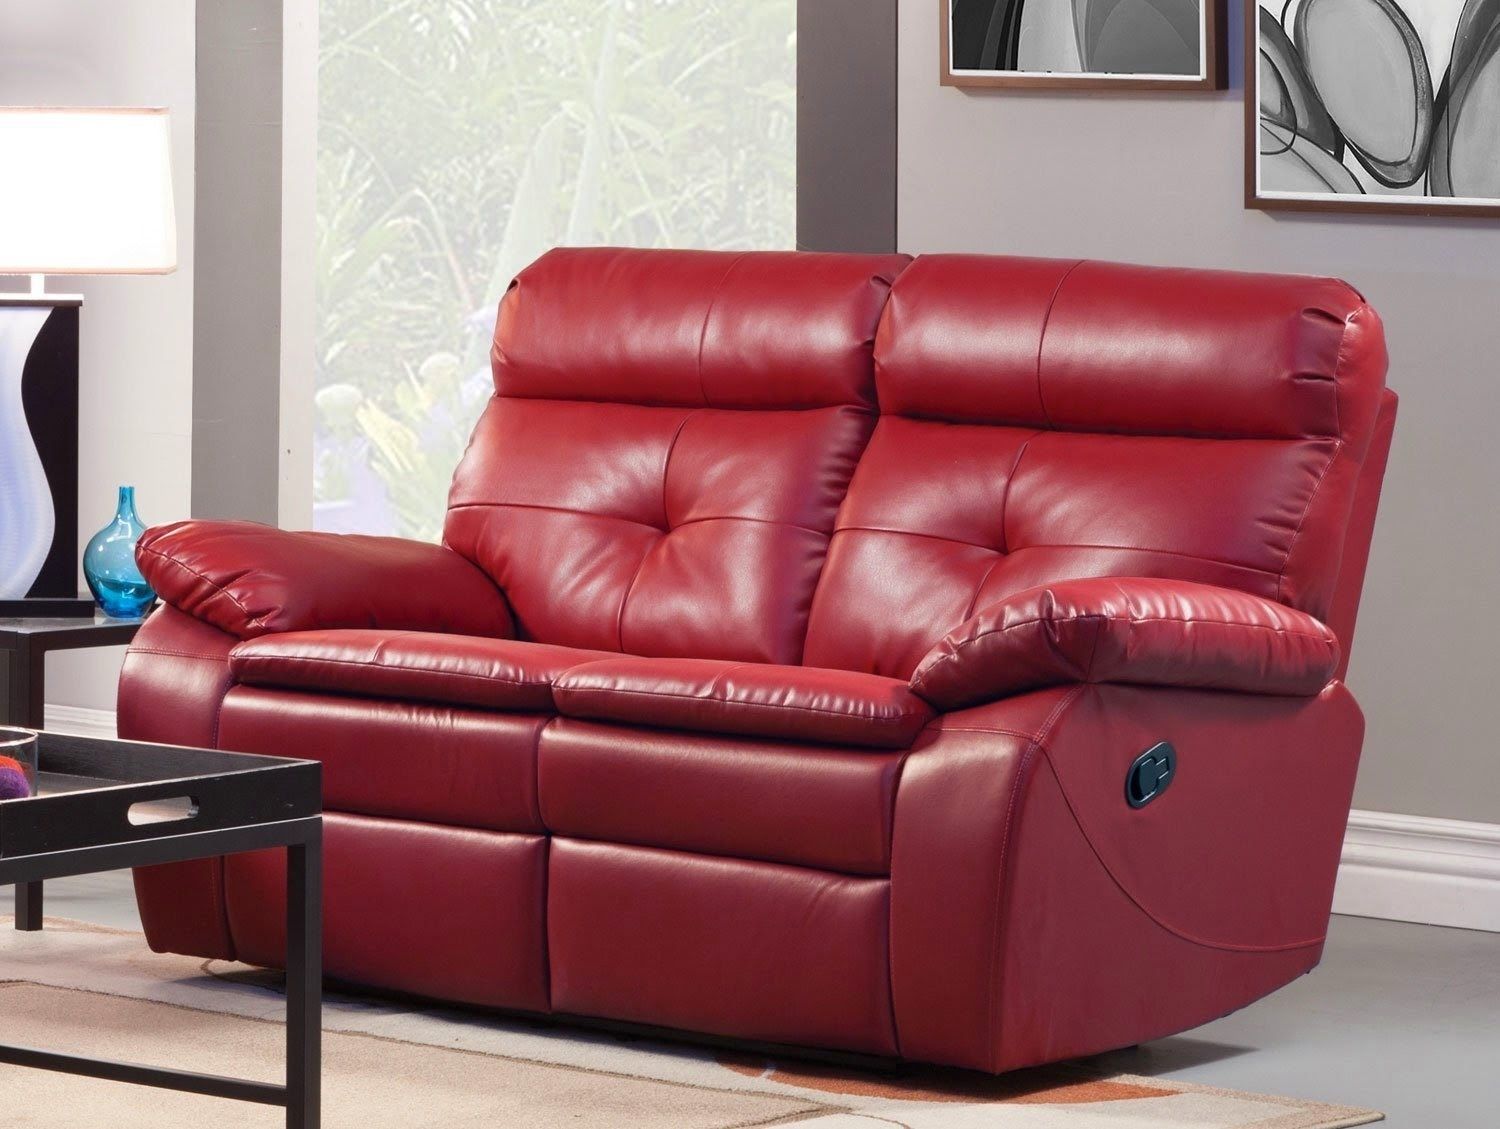 Good Red Leather Reclining Sofa And Loveseat 71 Sofa Design Ideas Intended For Red Leather Reclining Sofas And Loveseats (View 4 of 15)